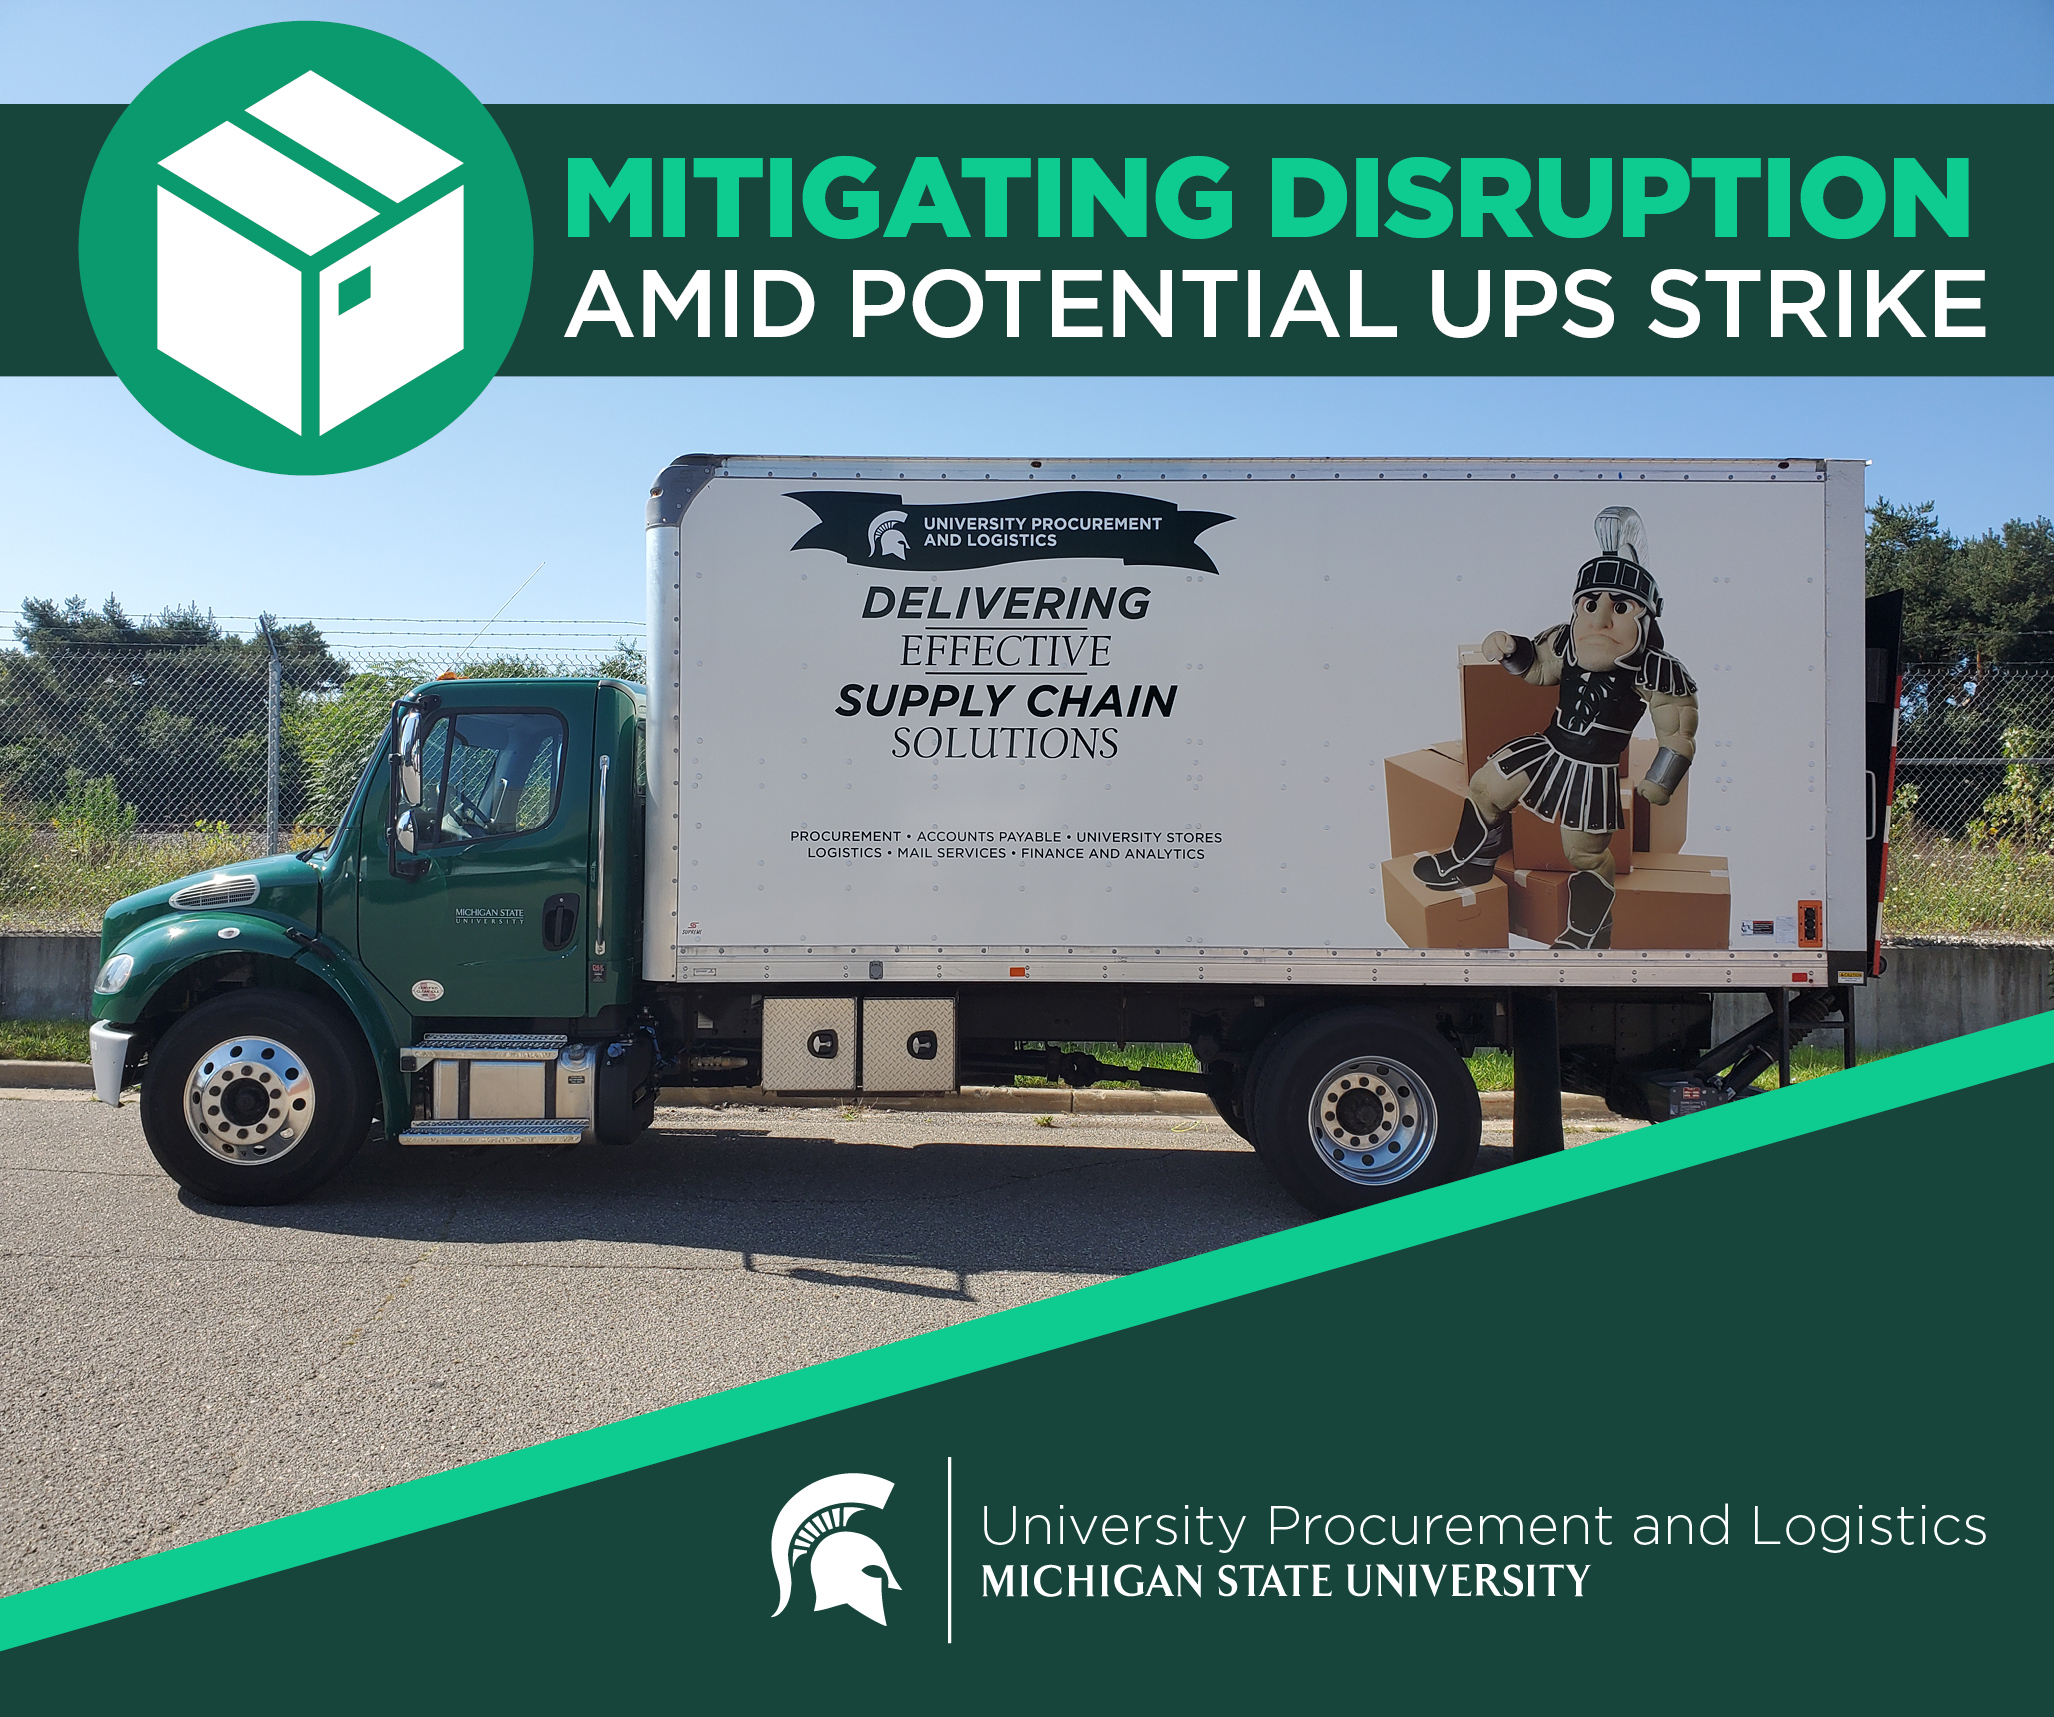 An image of a UPL delivery truck with title text above in a green banner that says "Mitigating disruption amid potential UPS strike." The UPL signature logo is displayed in the bottom right corner of the image. 